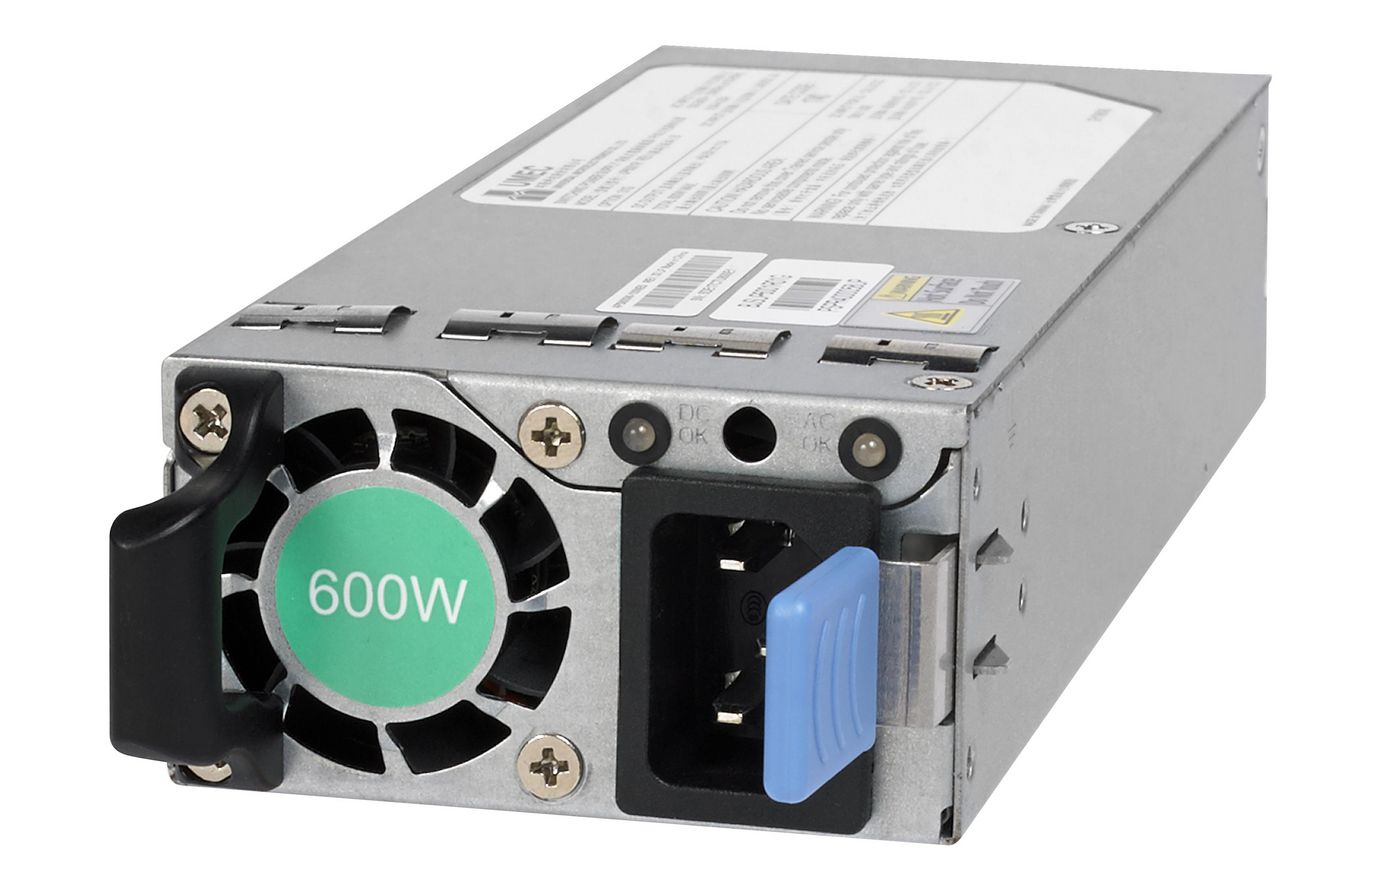 NETGEAR 600W Modular Power Supply Unit for M4350 series Switches